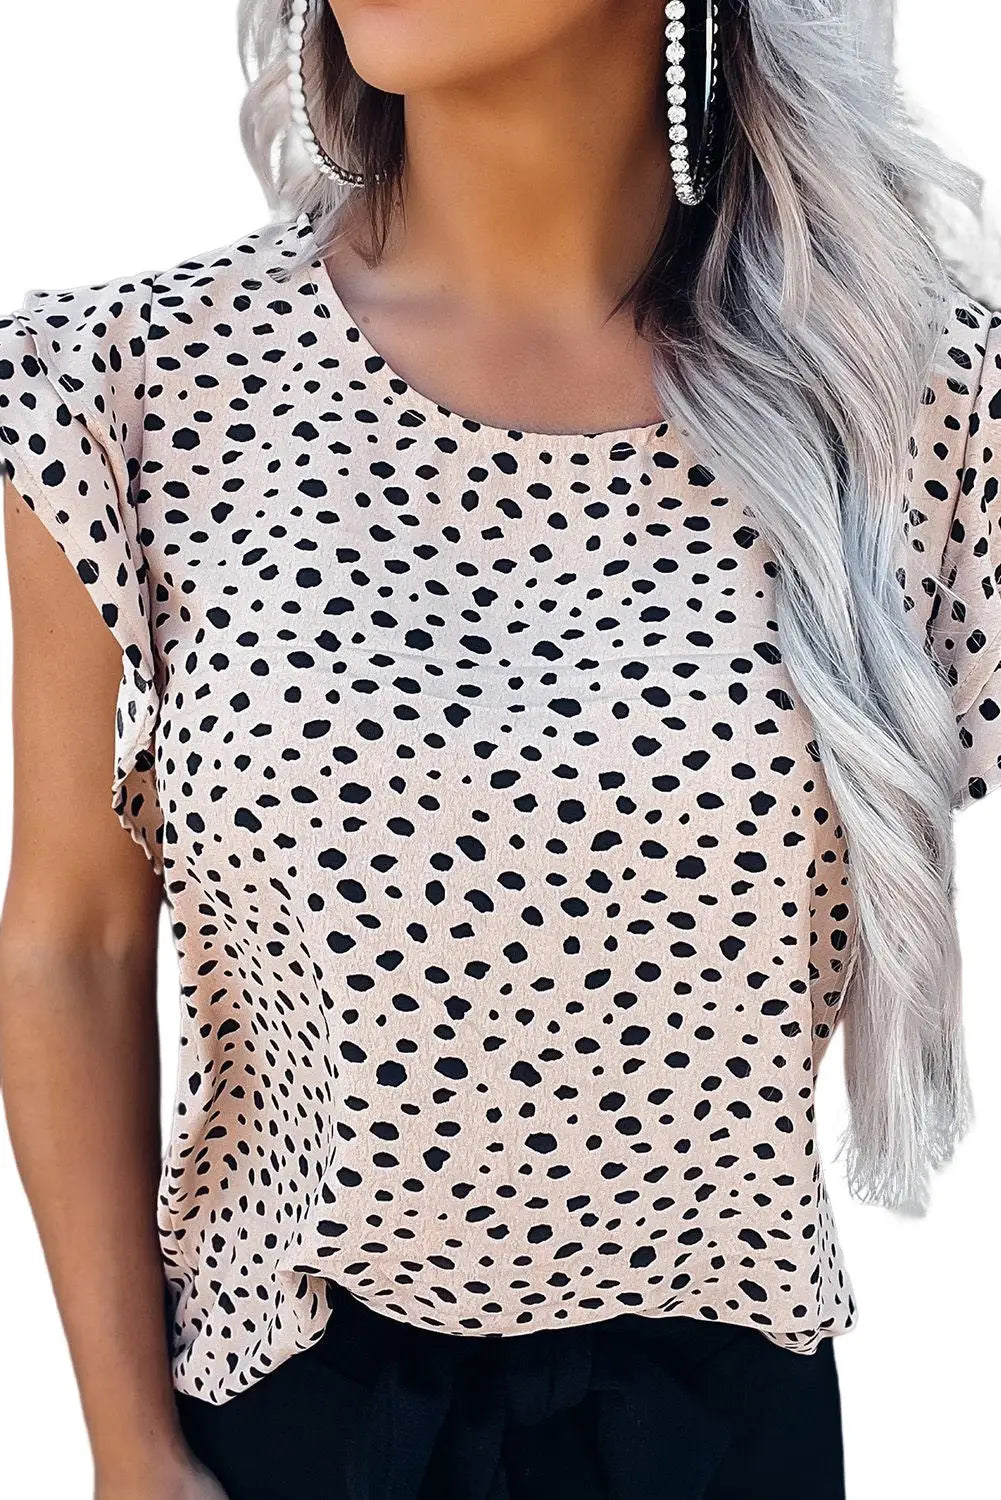 Leopard spotted print o-neck ruffled tank top - tops